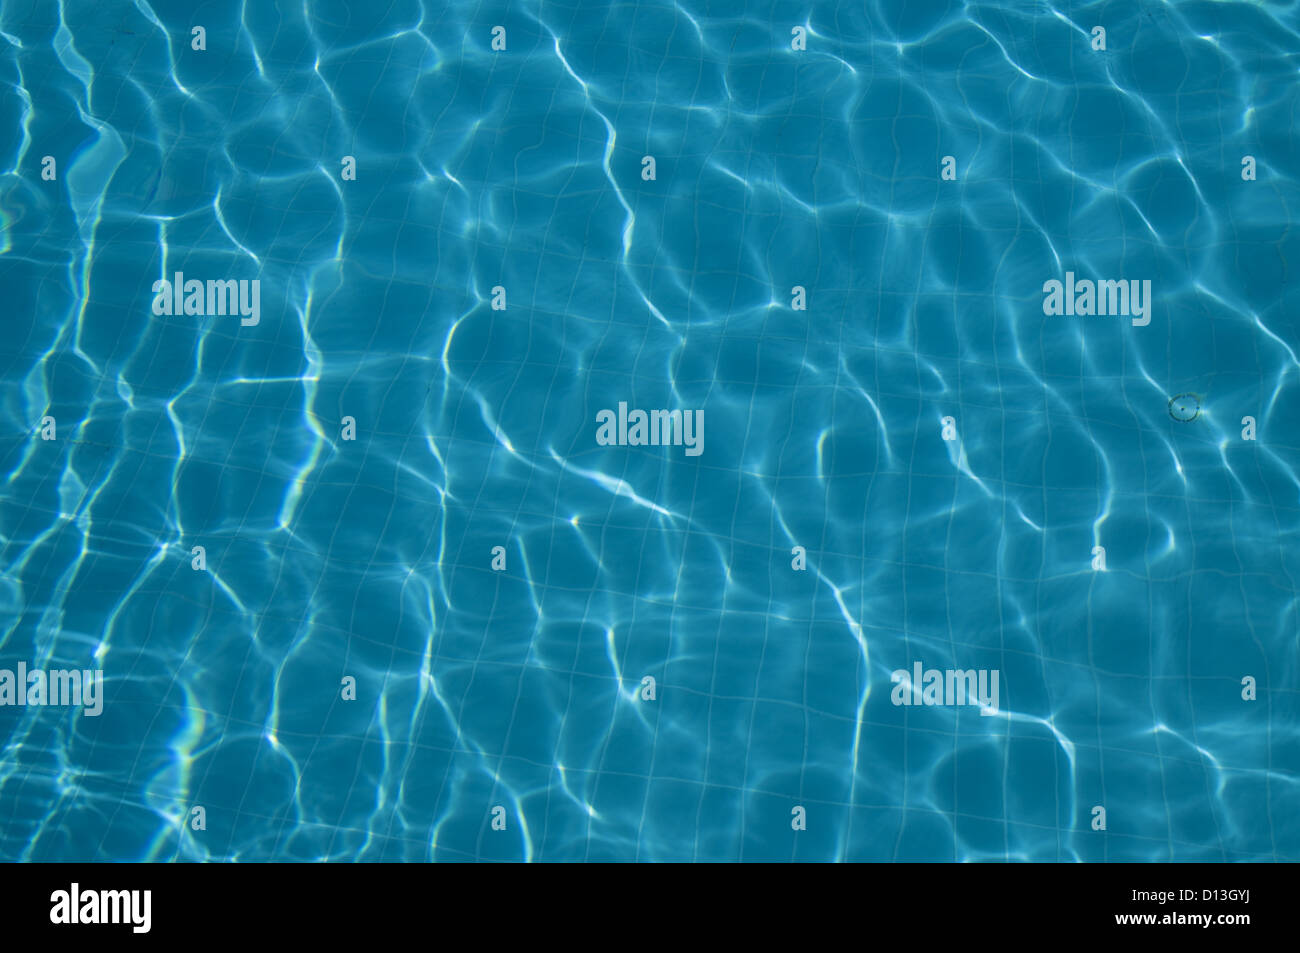 blue water swiming pool background Stock Photo